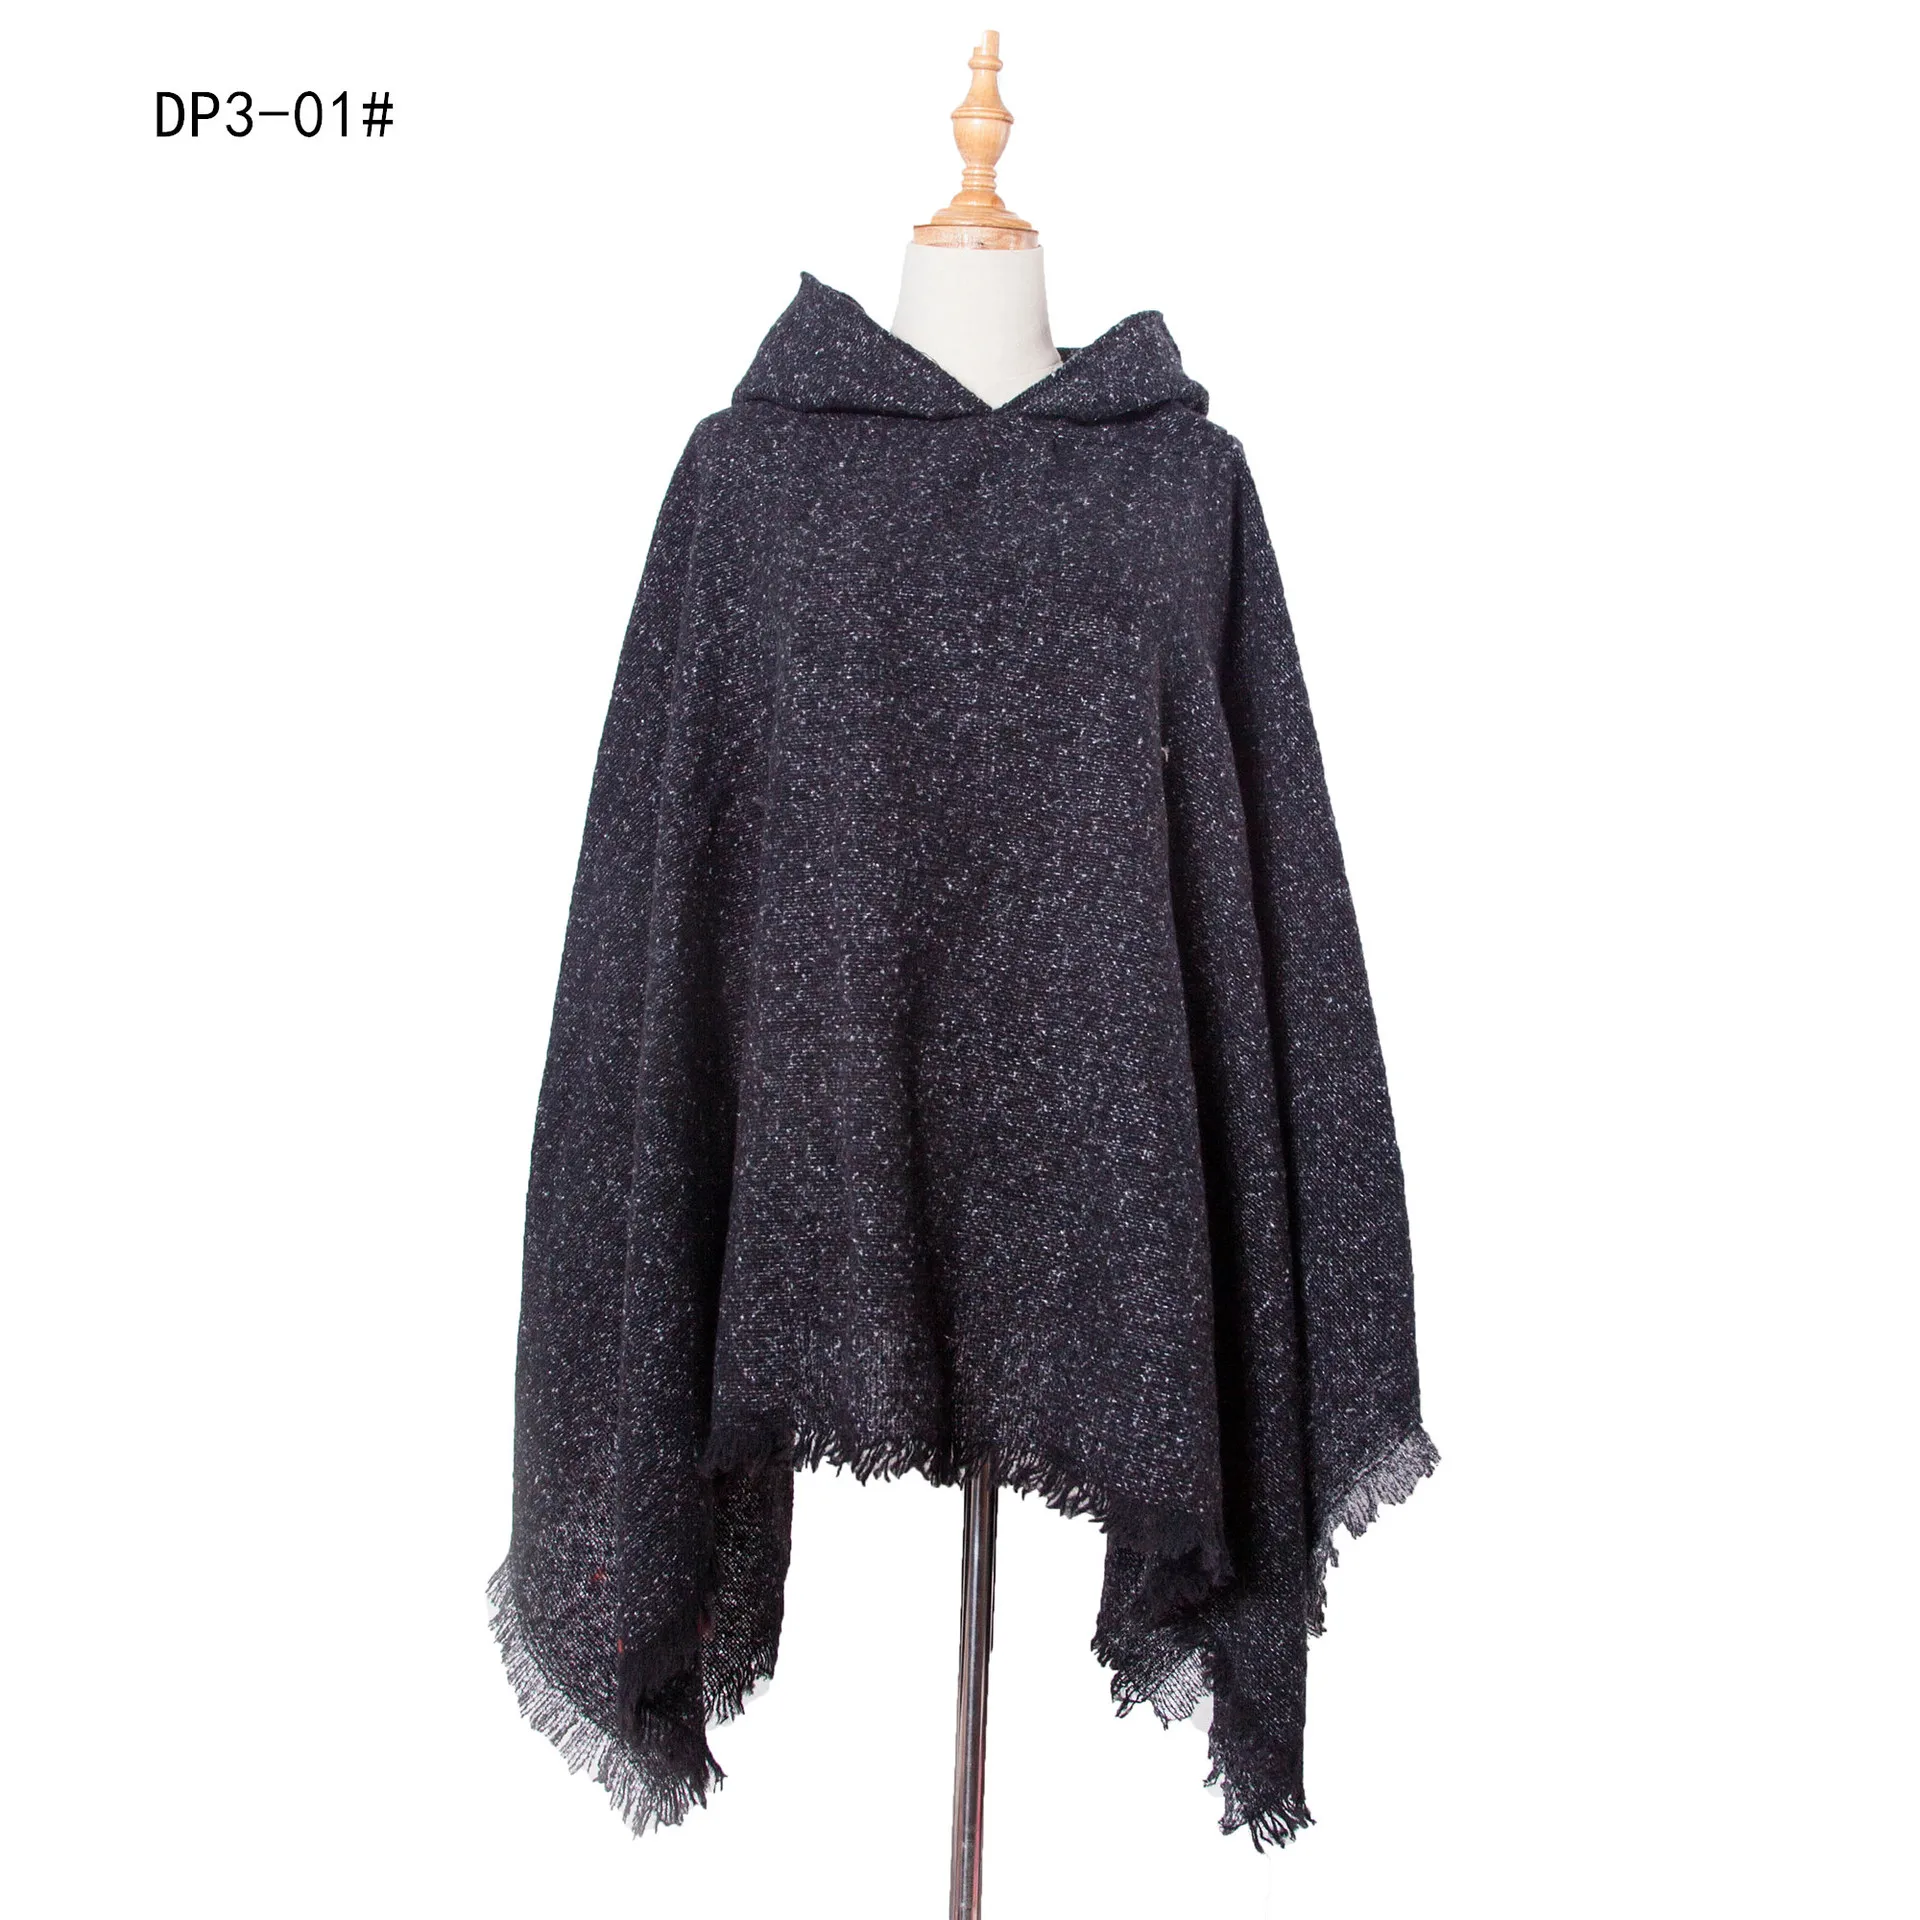 Autumn Winter New Loop Yarn Hooded Pullover Tourism Solid Color Cape Women Fashion Street Poncho Lady Capes Black Cloaks tibet princess horse race robe litang street life noble tibetan clothing ethnic minority tibet tourism holidays costume